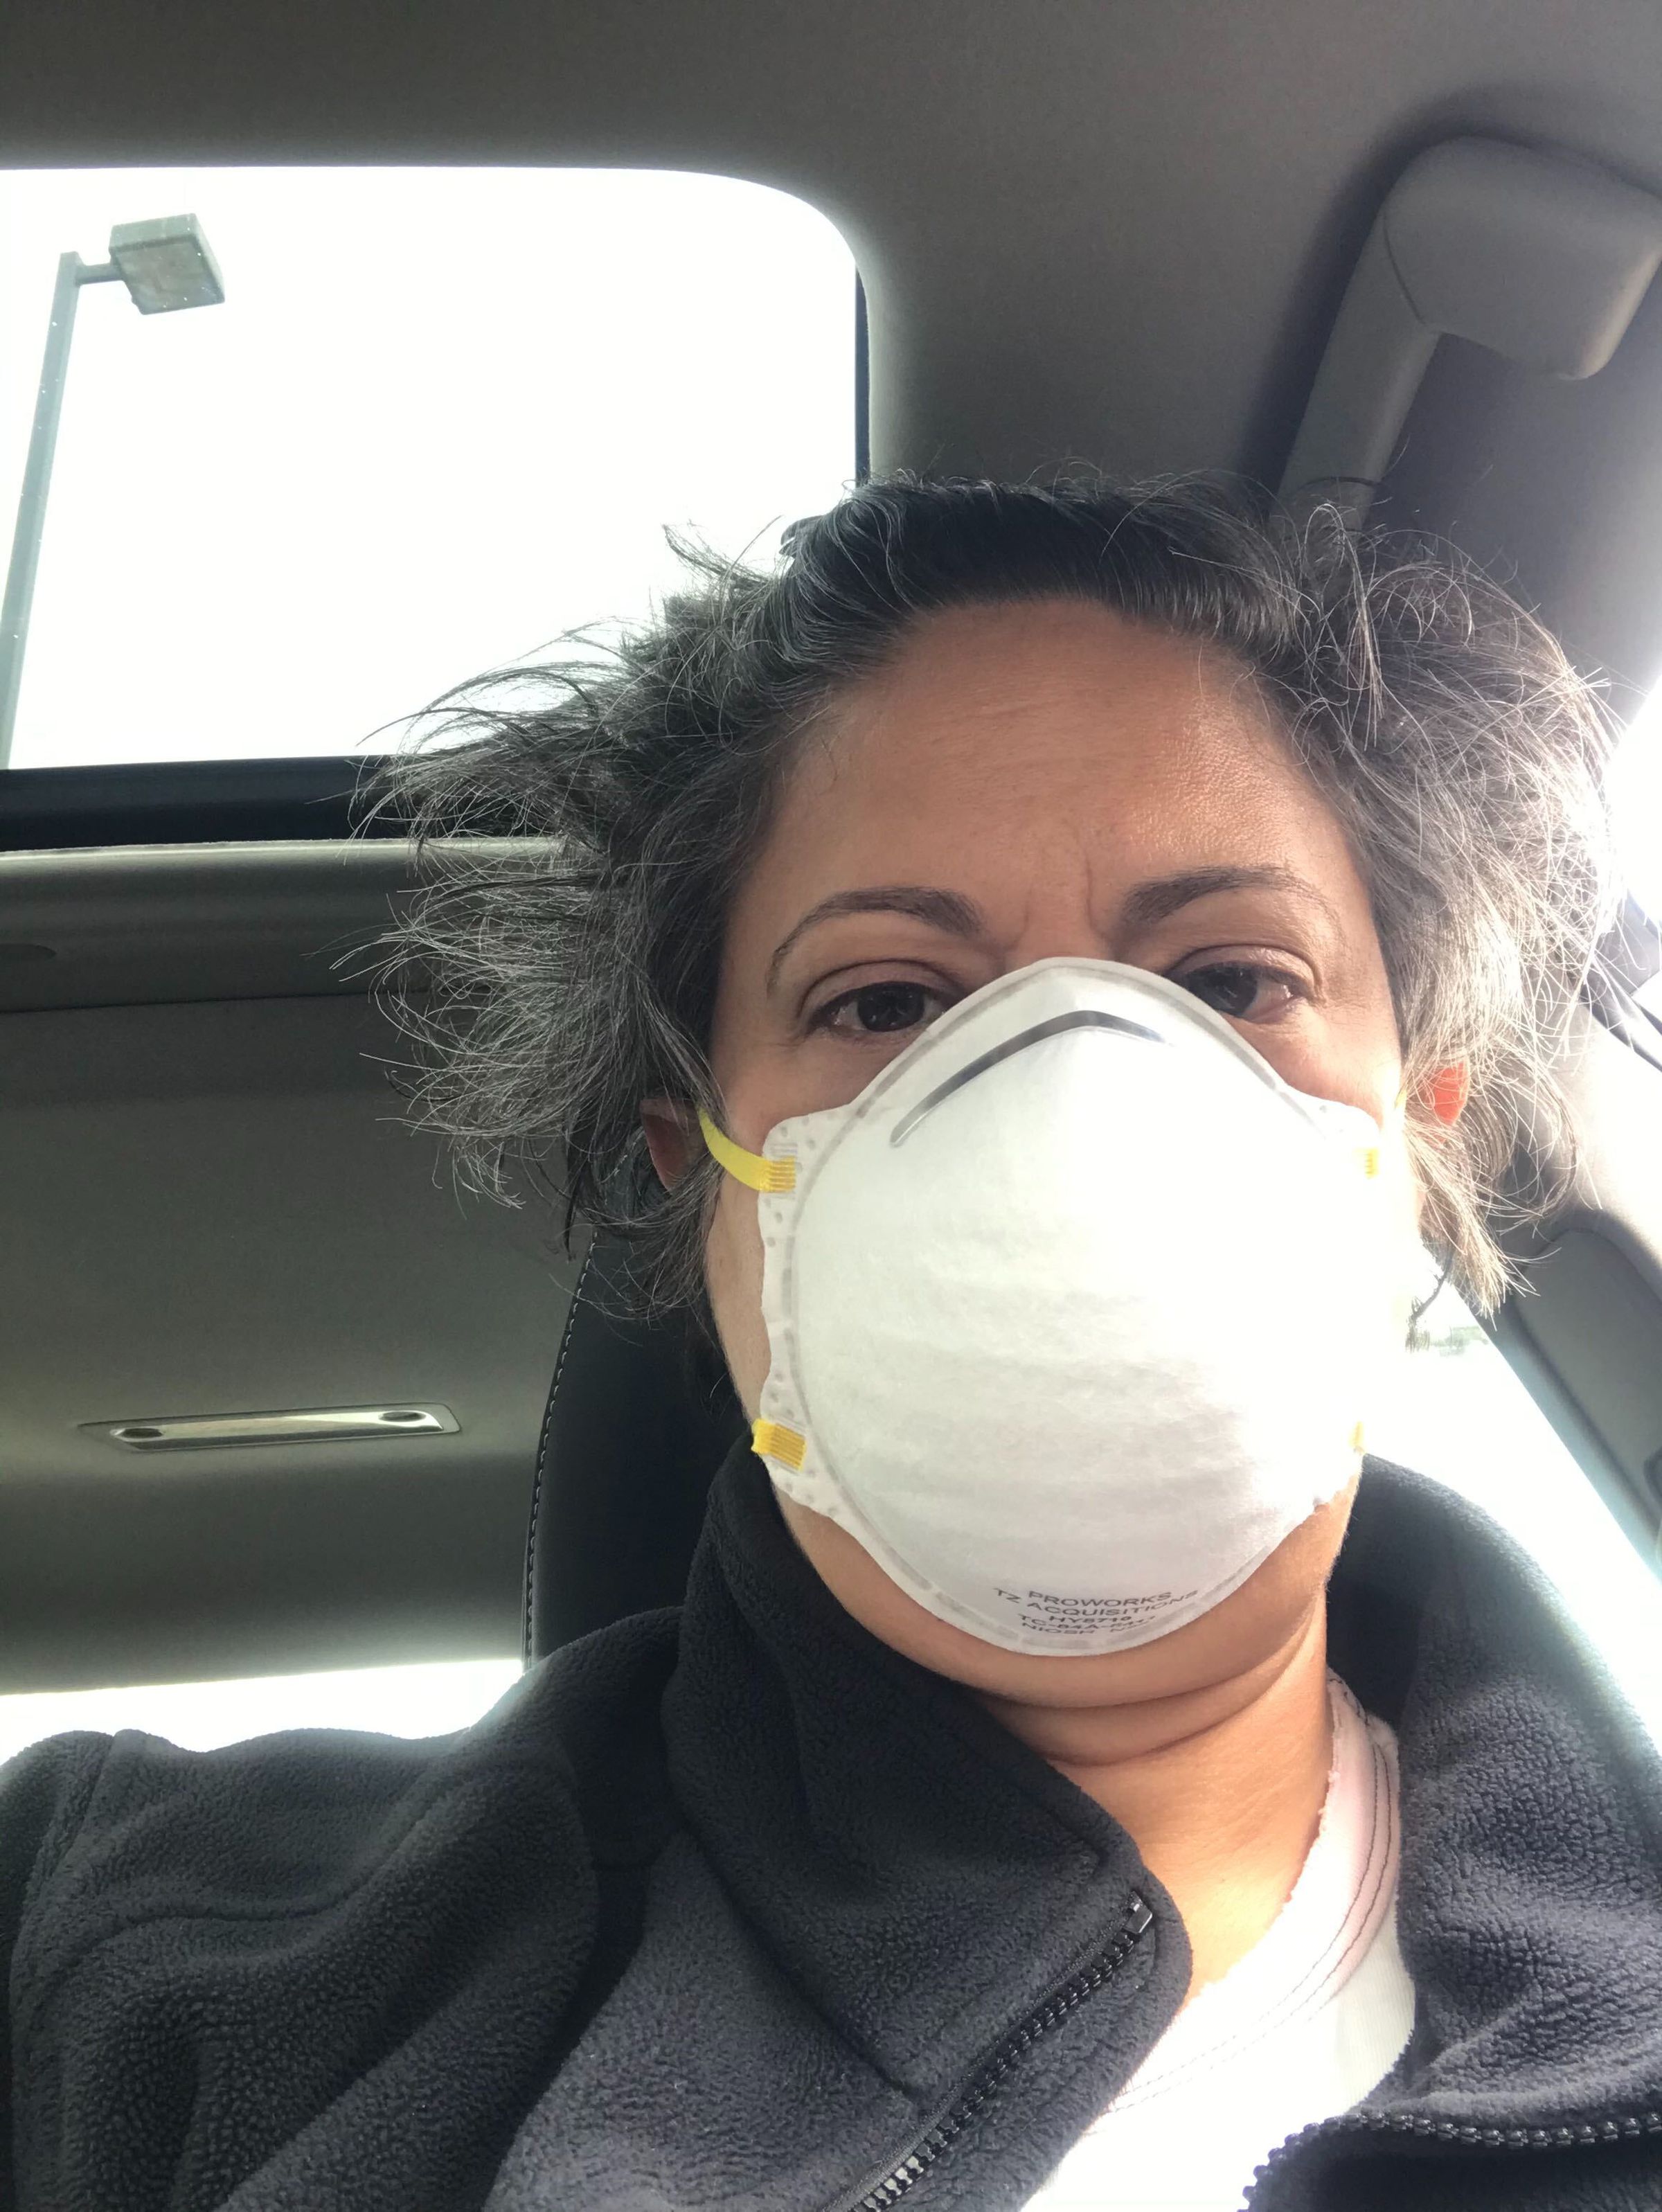 A selfie photo of Rachel in her car wearing a protective face mask.